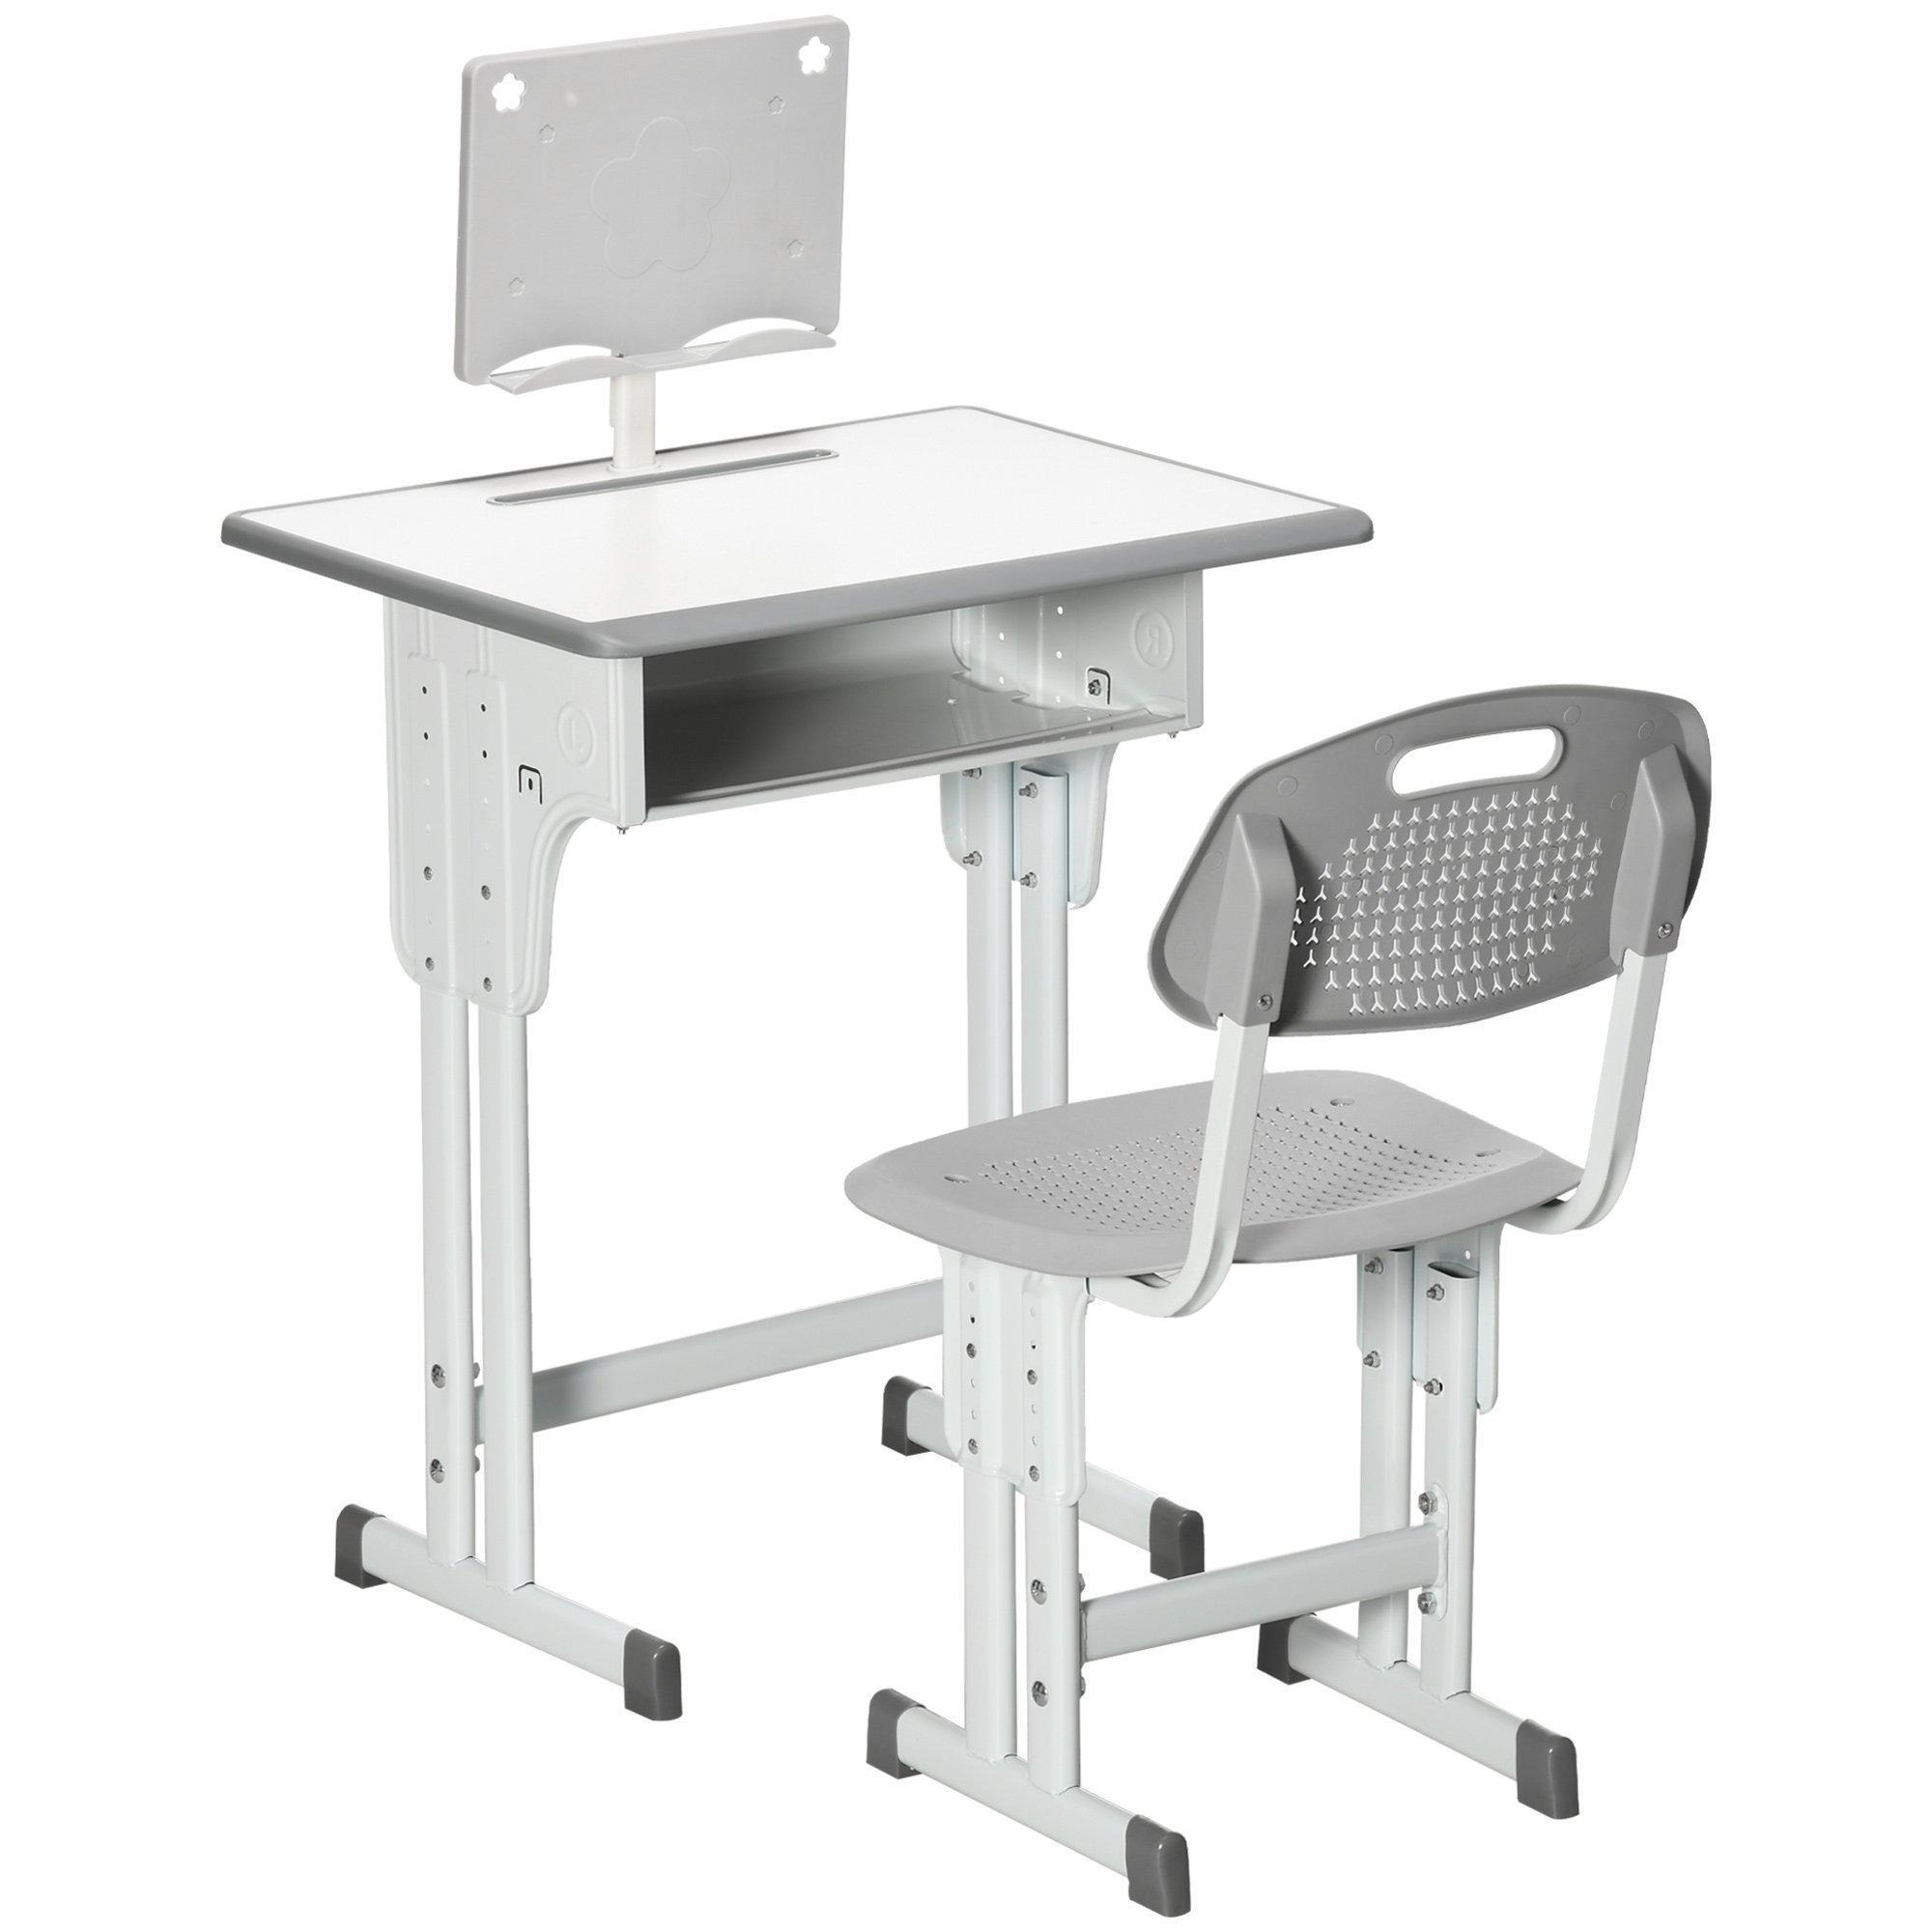 Desk and Chair Set Height Adjustable Study Table with Storage Book Stand - image 1